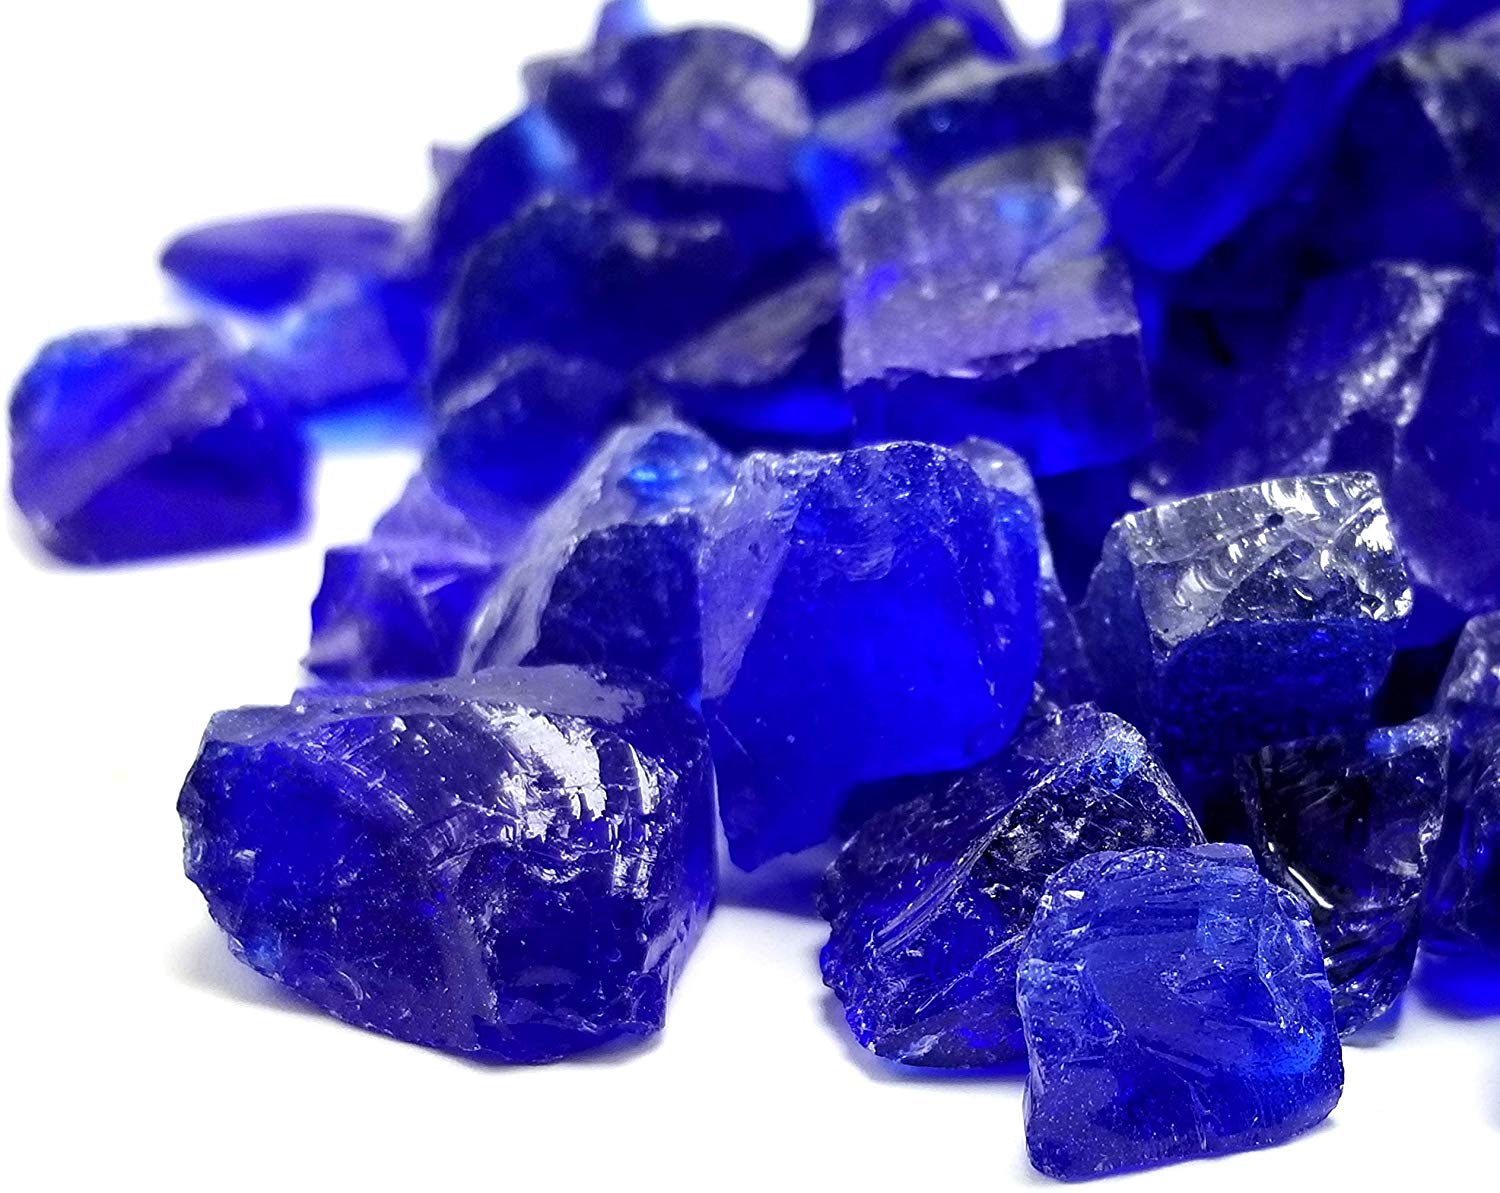 Cobalt Blue 1/2" - 3/4" Large Premium Fire Glass for Fireplace and Fire Pit